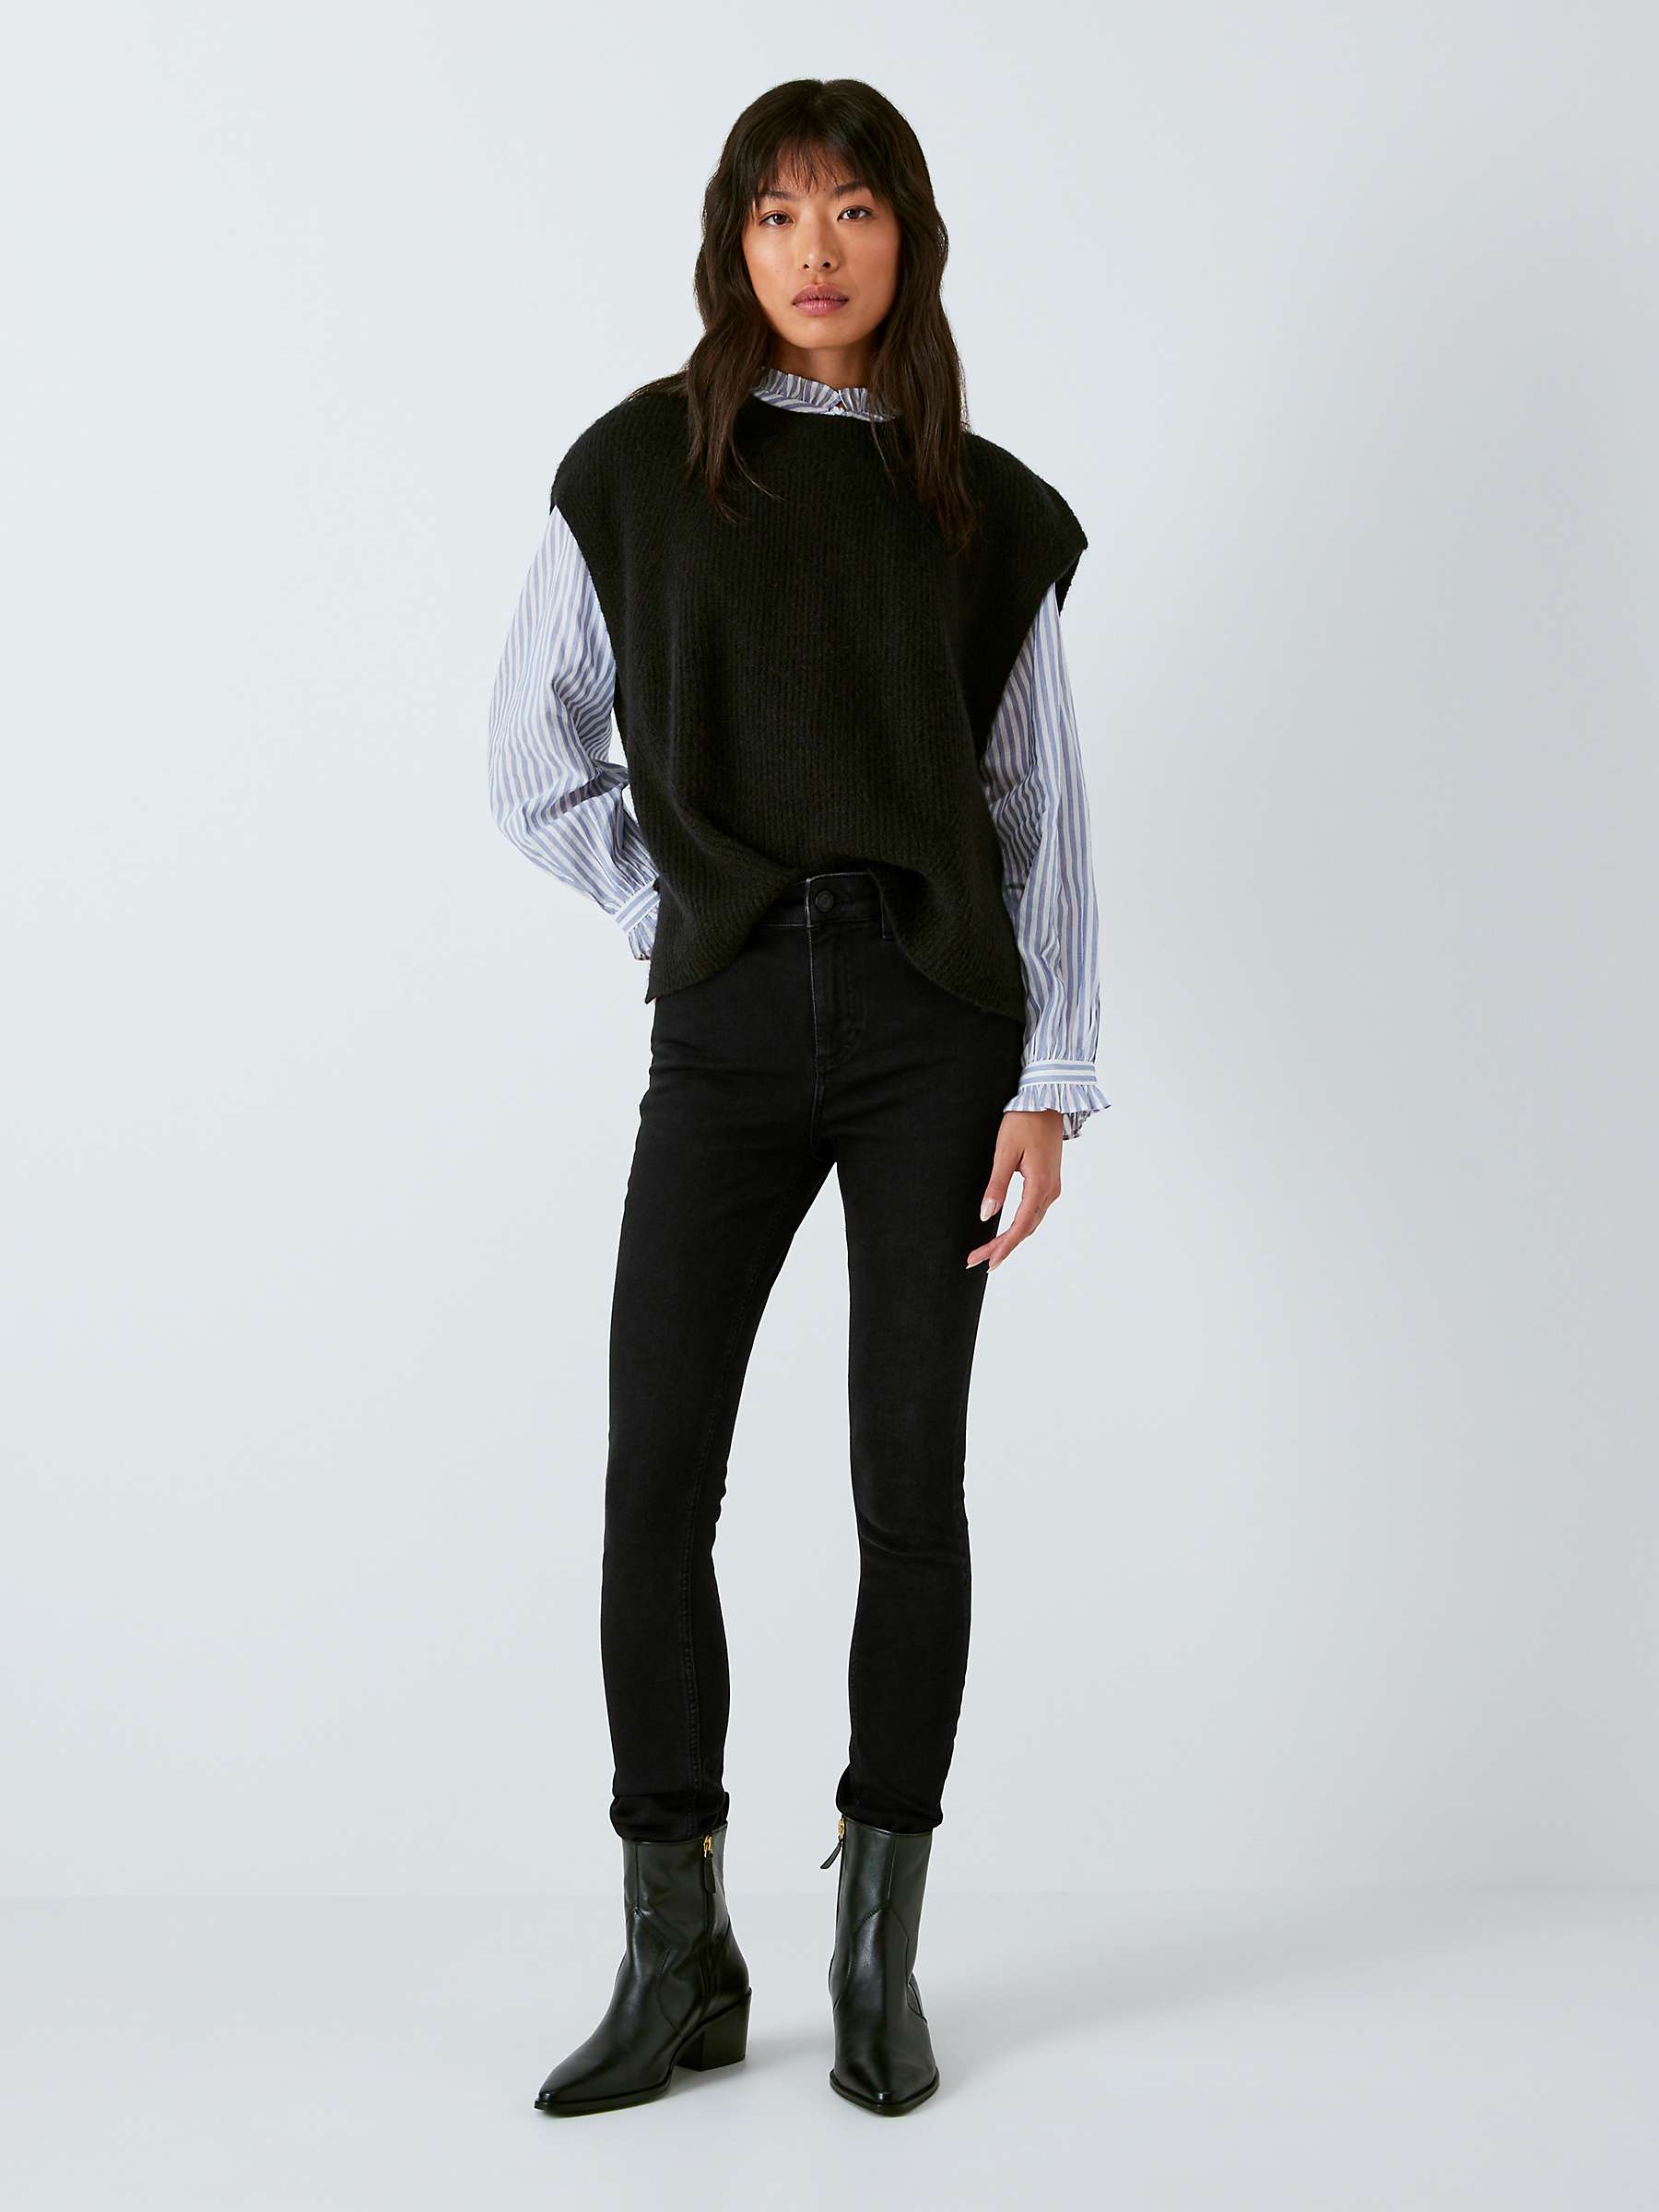 Buy AND/OR Abbot Kinney Skinny Jeans, Washed Black Online at johnlewis.com